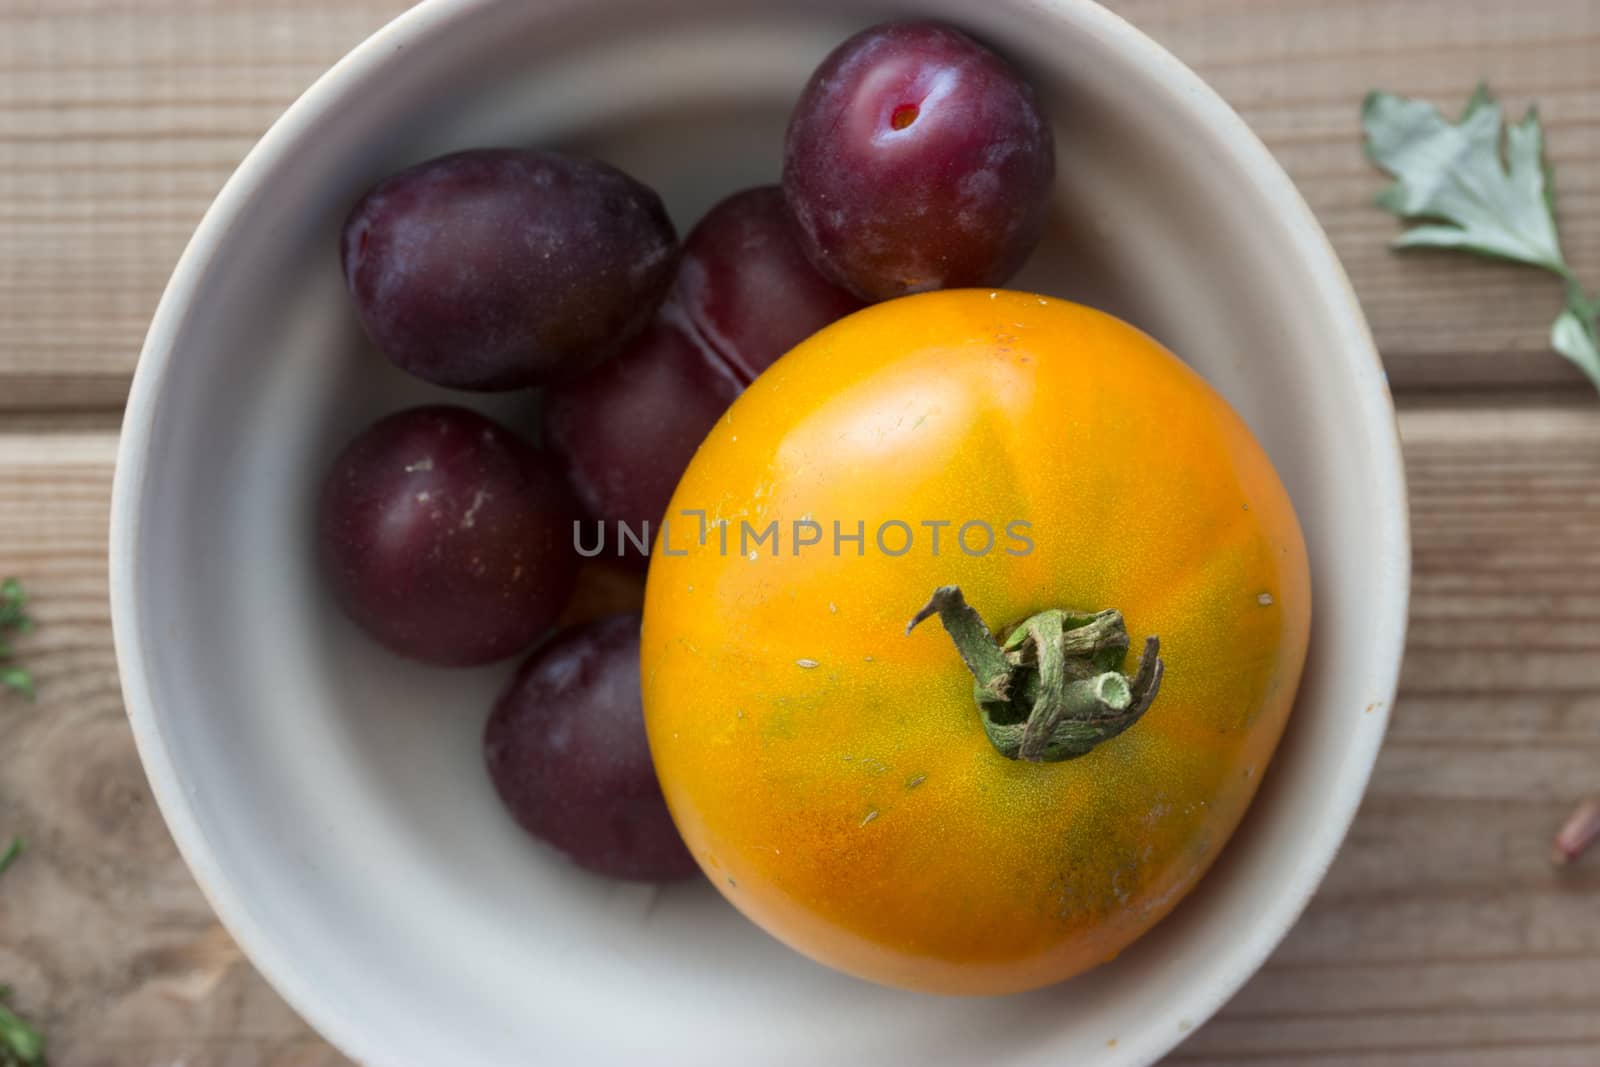 yellow tomato and black plum in a plate